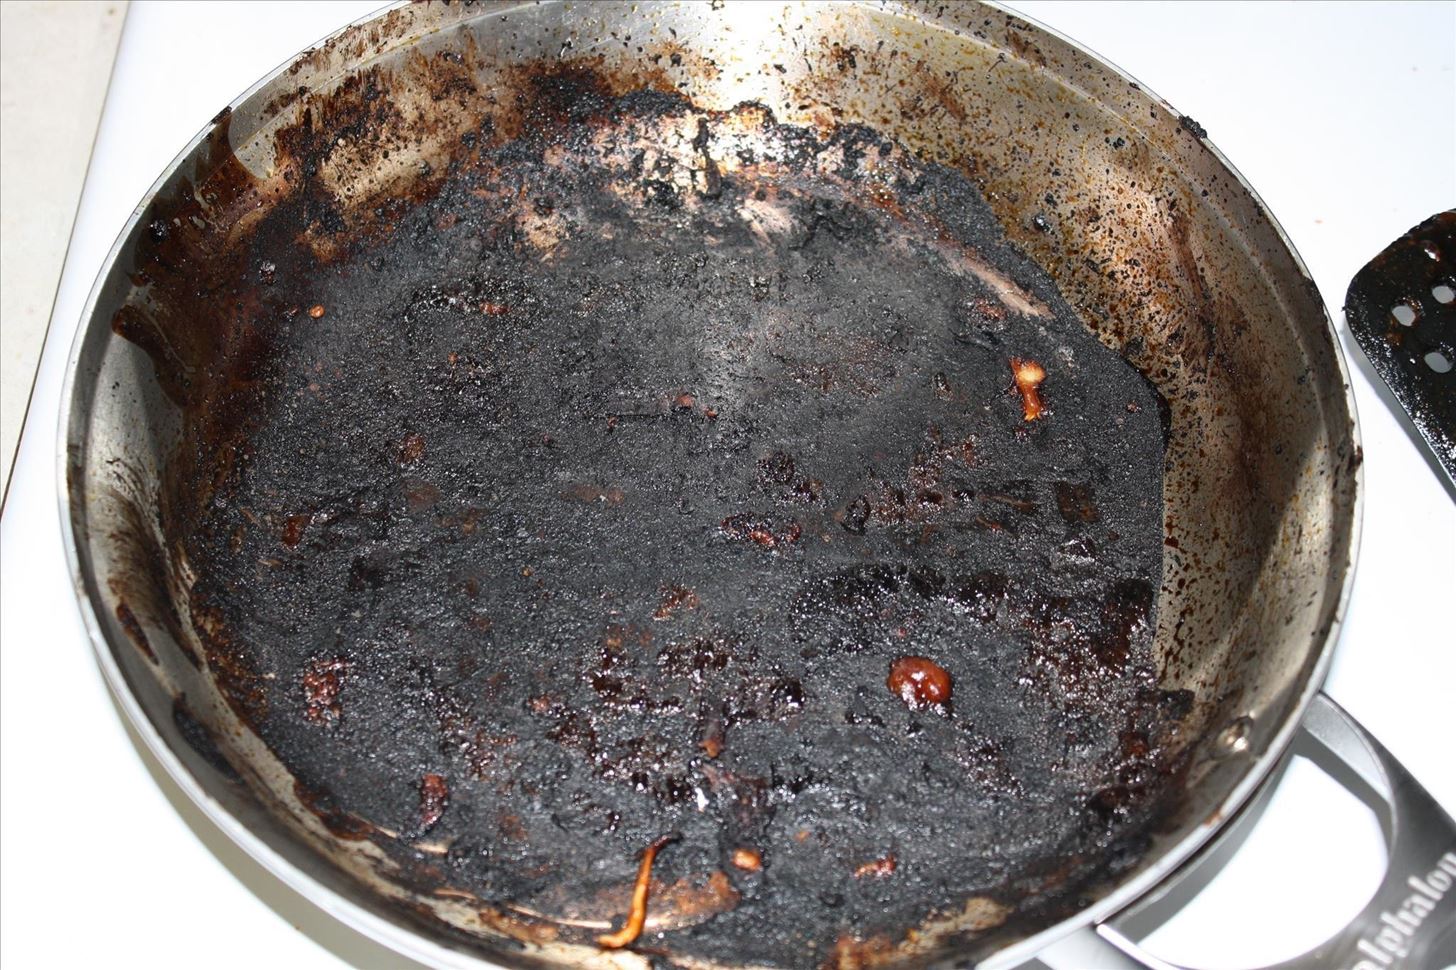 How to Remove Carbon Deposits from a Frying Pan